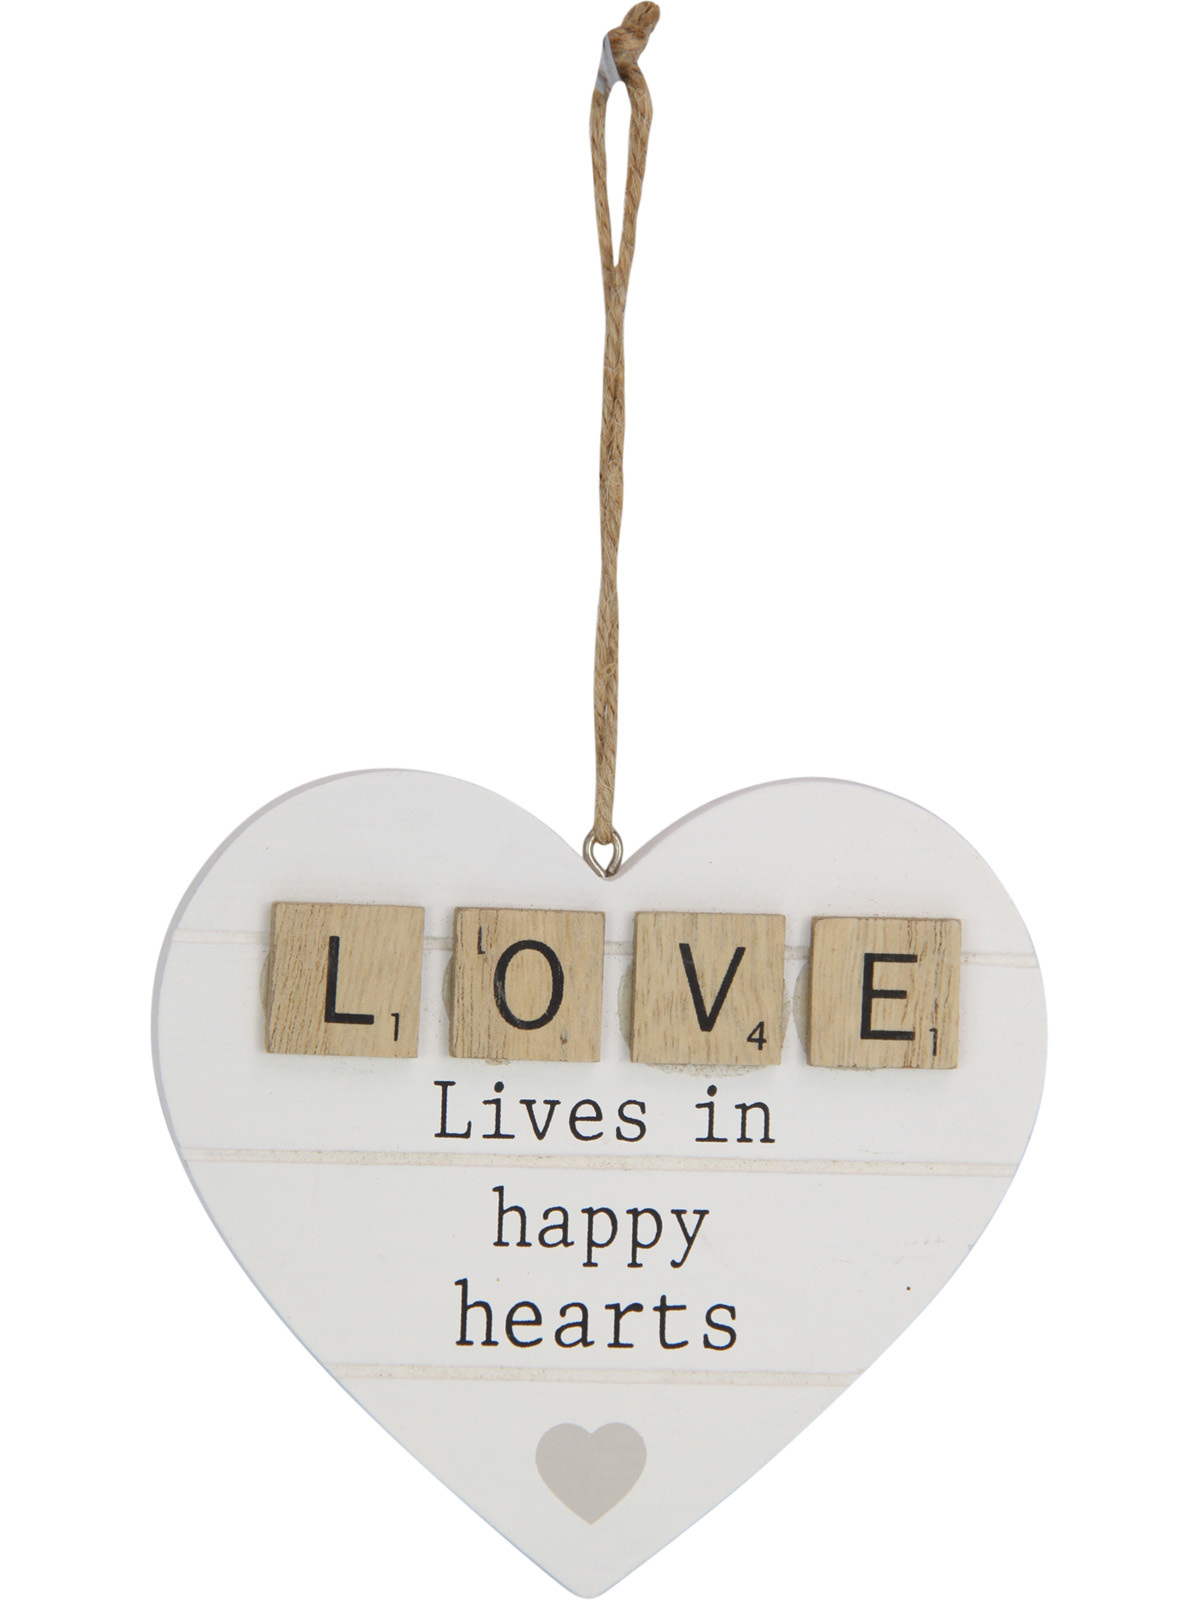 1pce 12cm Hanging Love Heart MDF Home Decor Ornament Lives In Happy Hearts